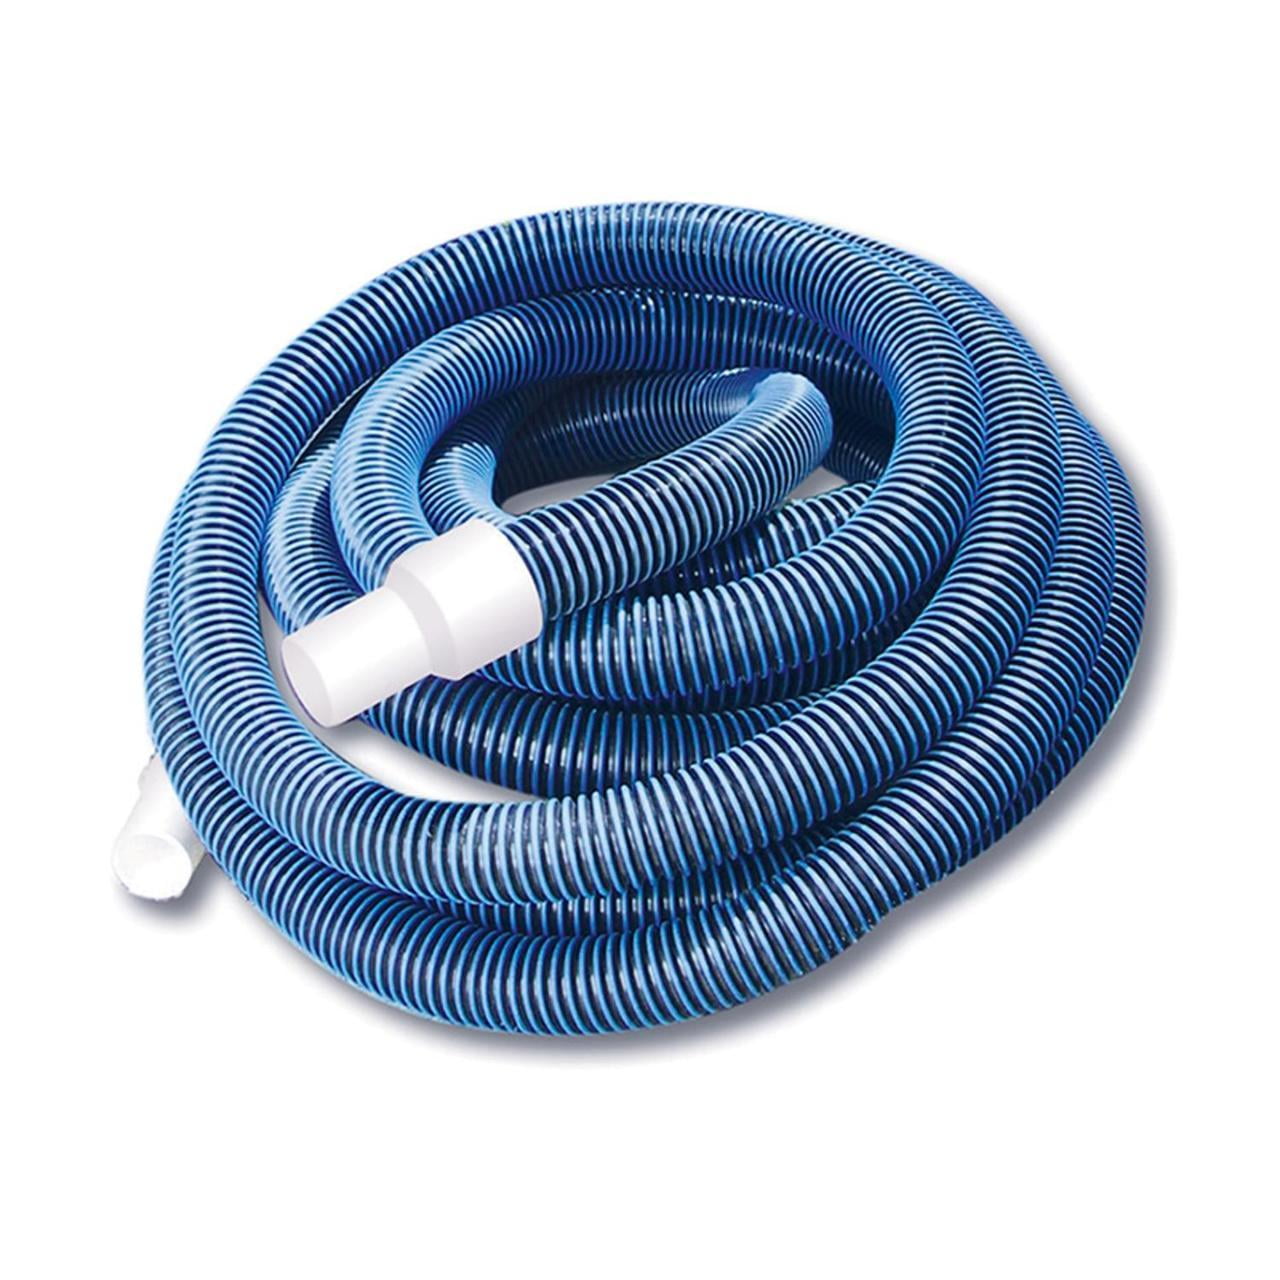 PRIMAL by Puri Tech 1.5 Inch x 50' Feet Long Commercial Service Vacuum Hose 1pk 